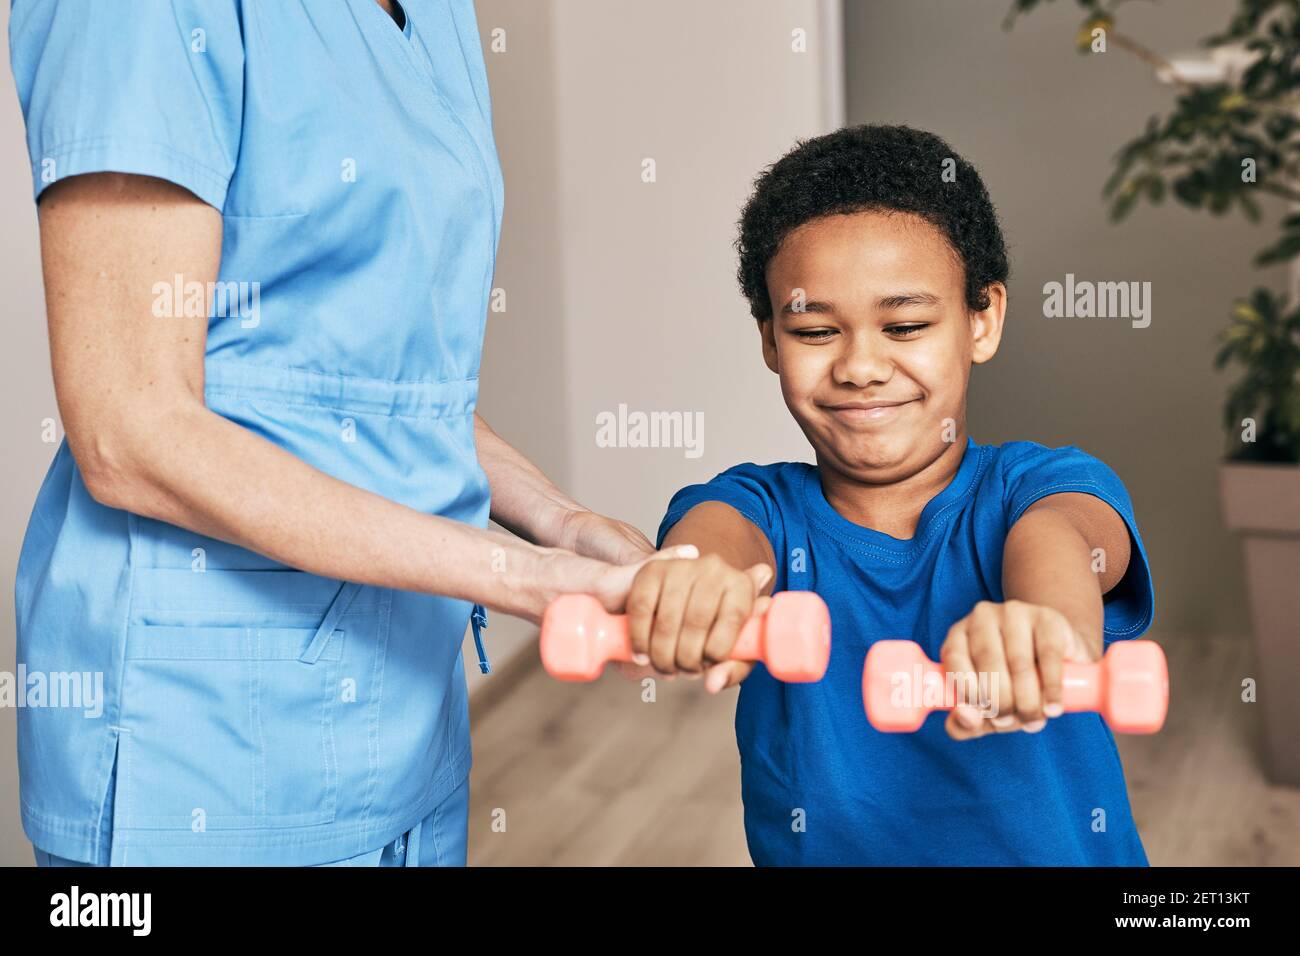 African American boy trains with physiotherapist using dumbbells at rehab center Stock Photo